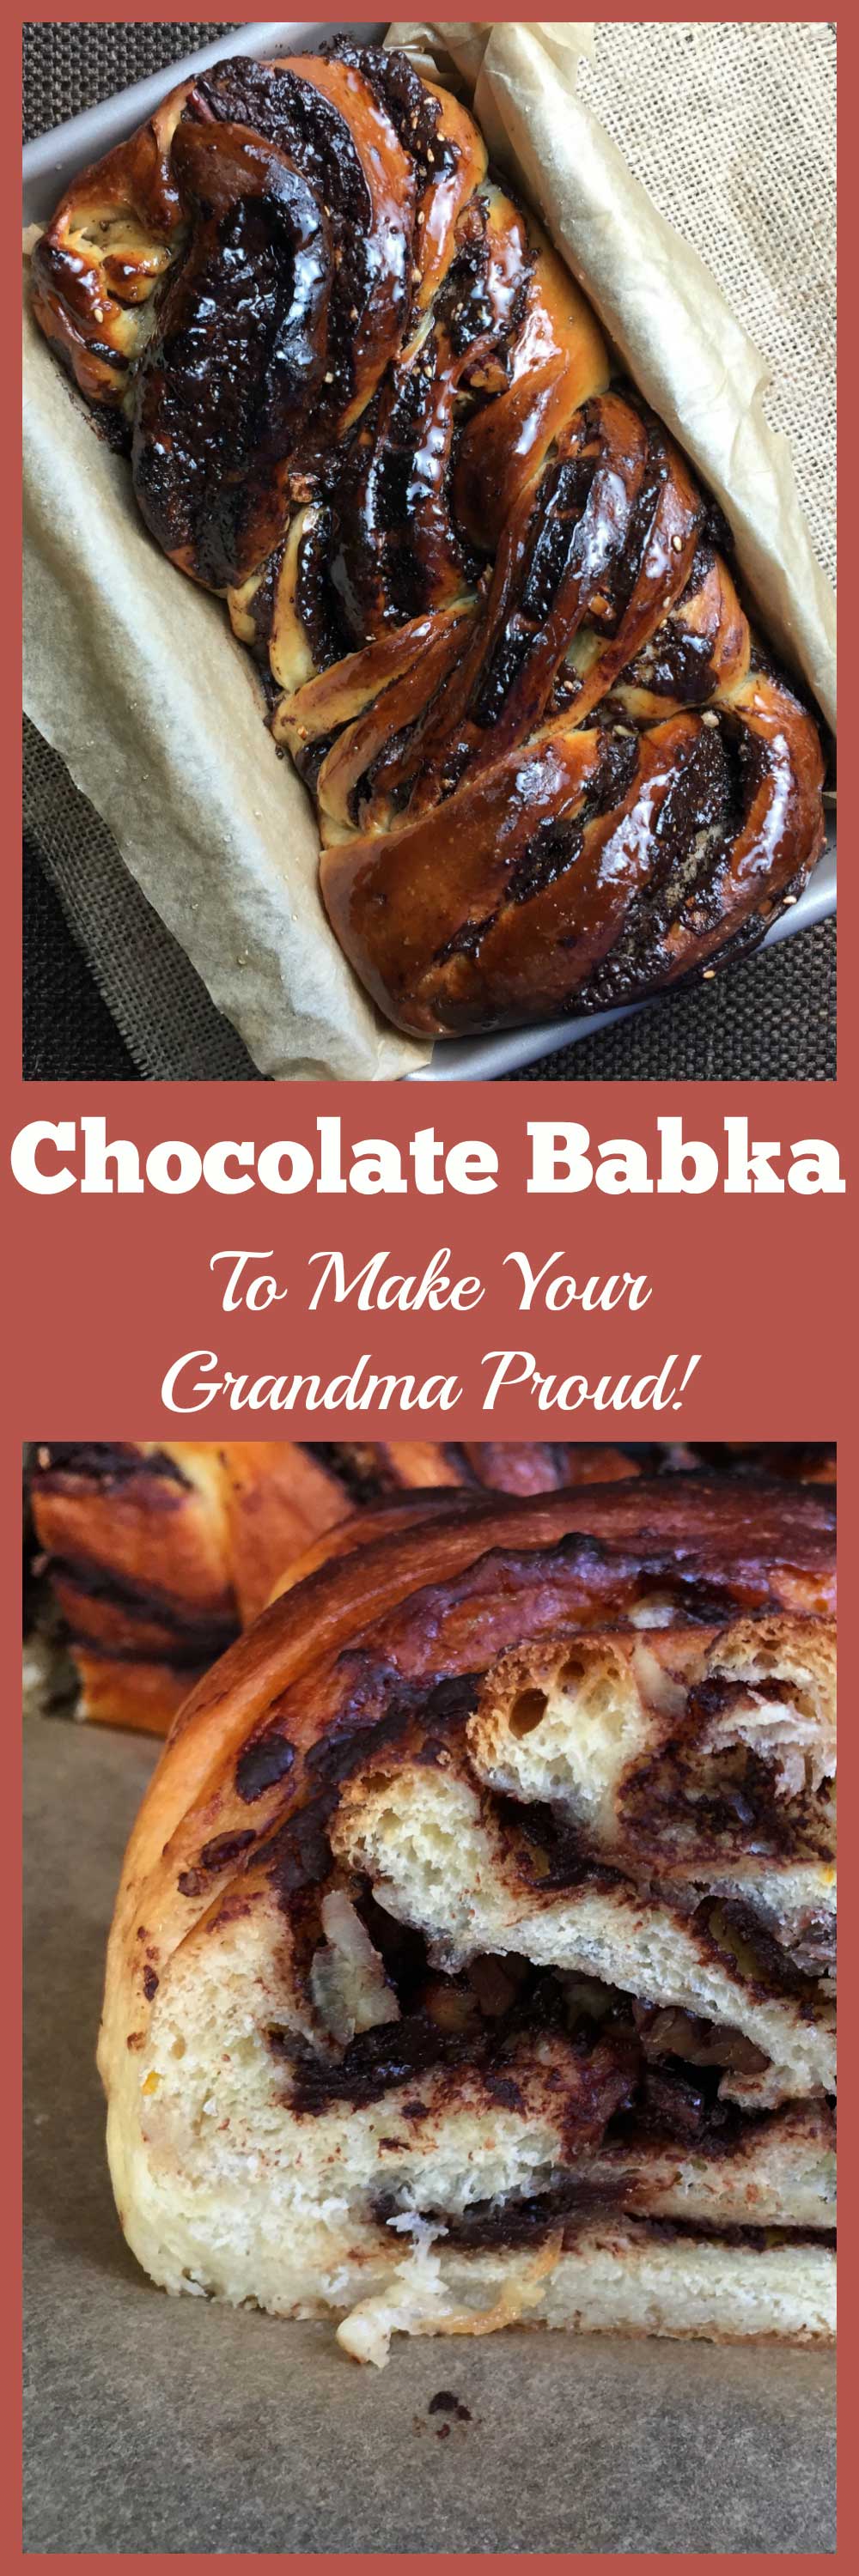 Chocolate Babka (aka Krantz cake in Israel) is a brioche-like pastry whose claim to fame is an episode of Seinfeld. The lesser known babka is now making a comeback to the mainstream. This recipe is from the Jerusalem cookbook for Tasting Jerusalem's February 2016 topic.